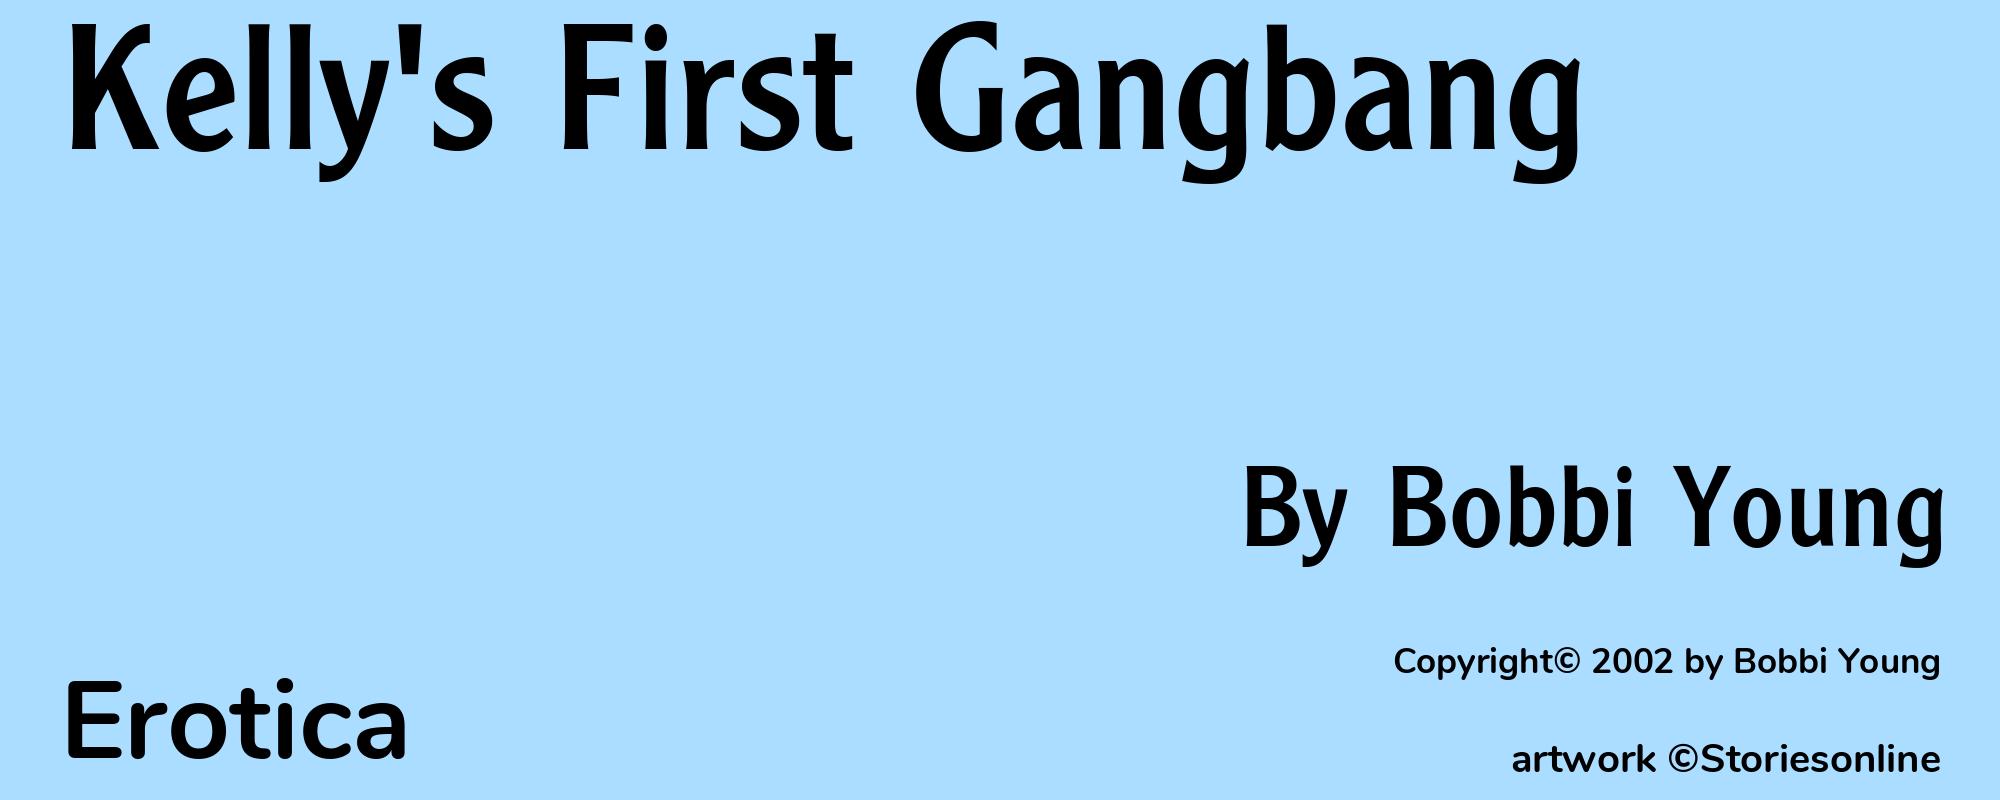 Kelly's First Gangbang - Cover